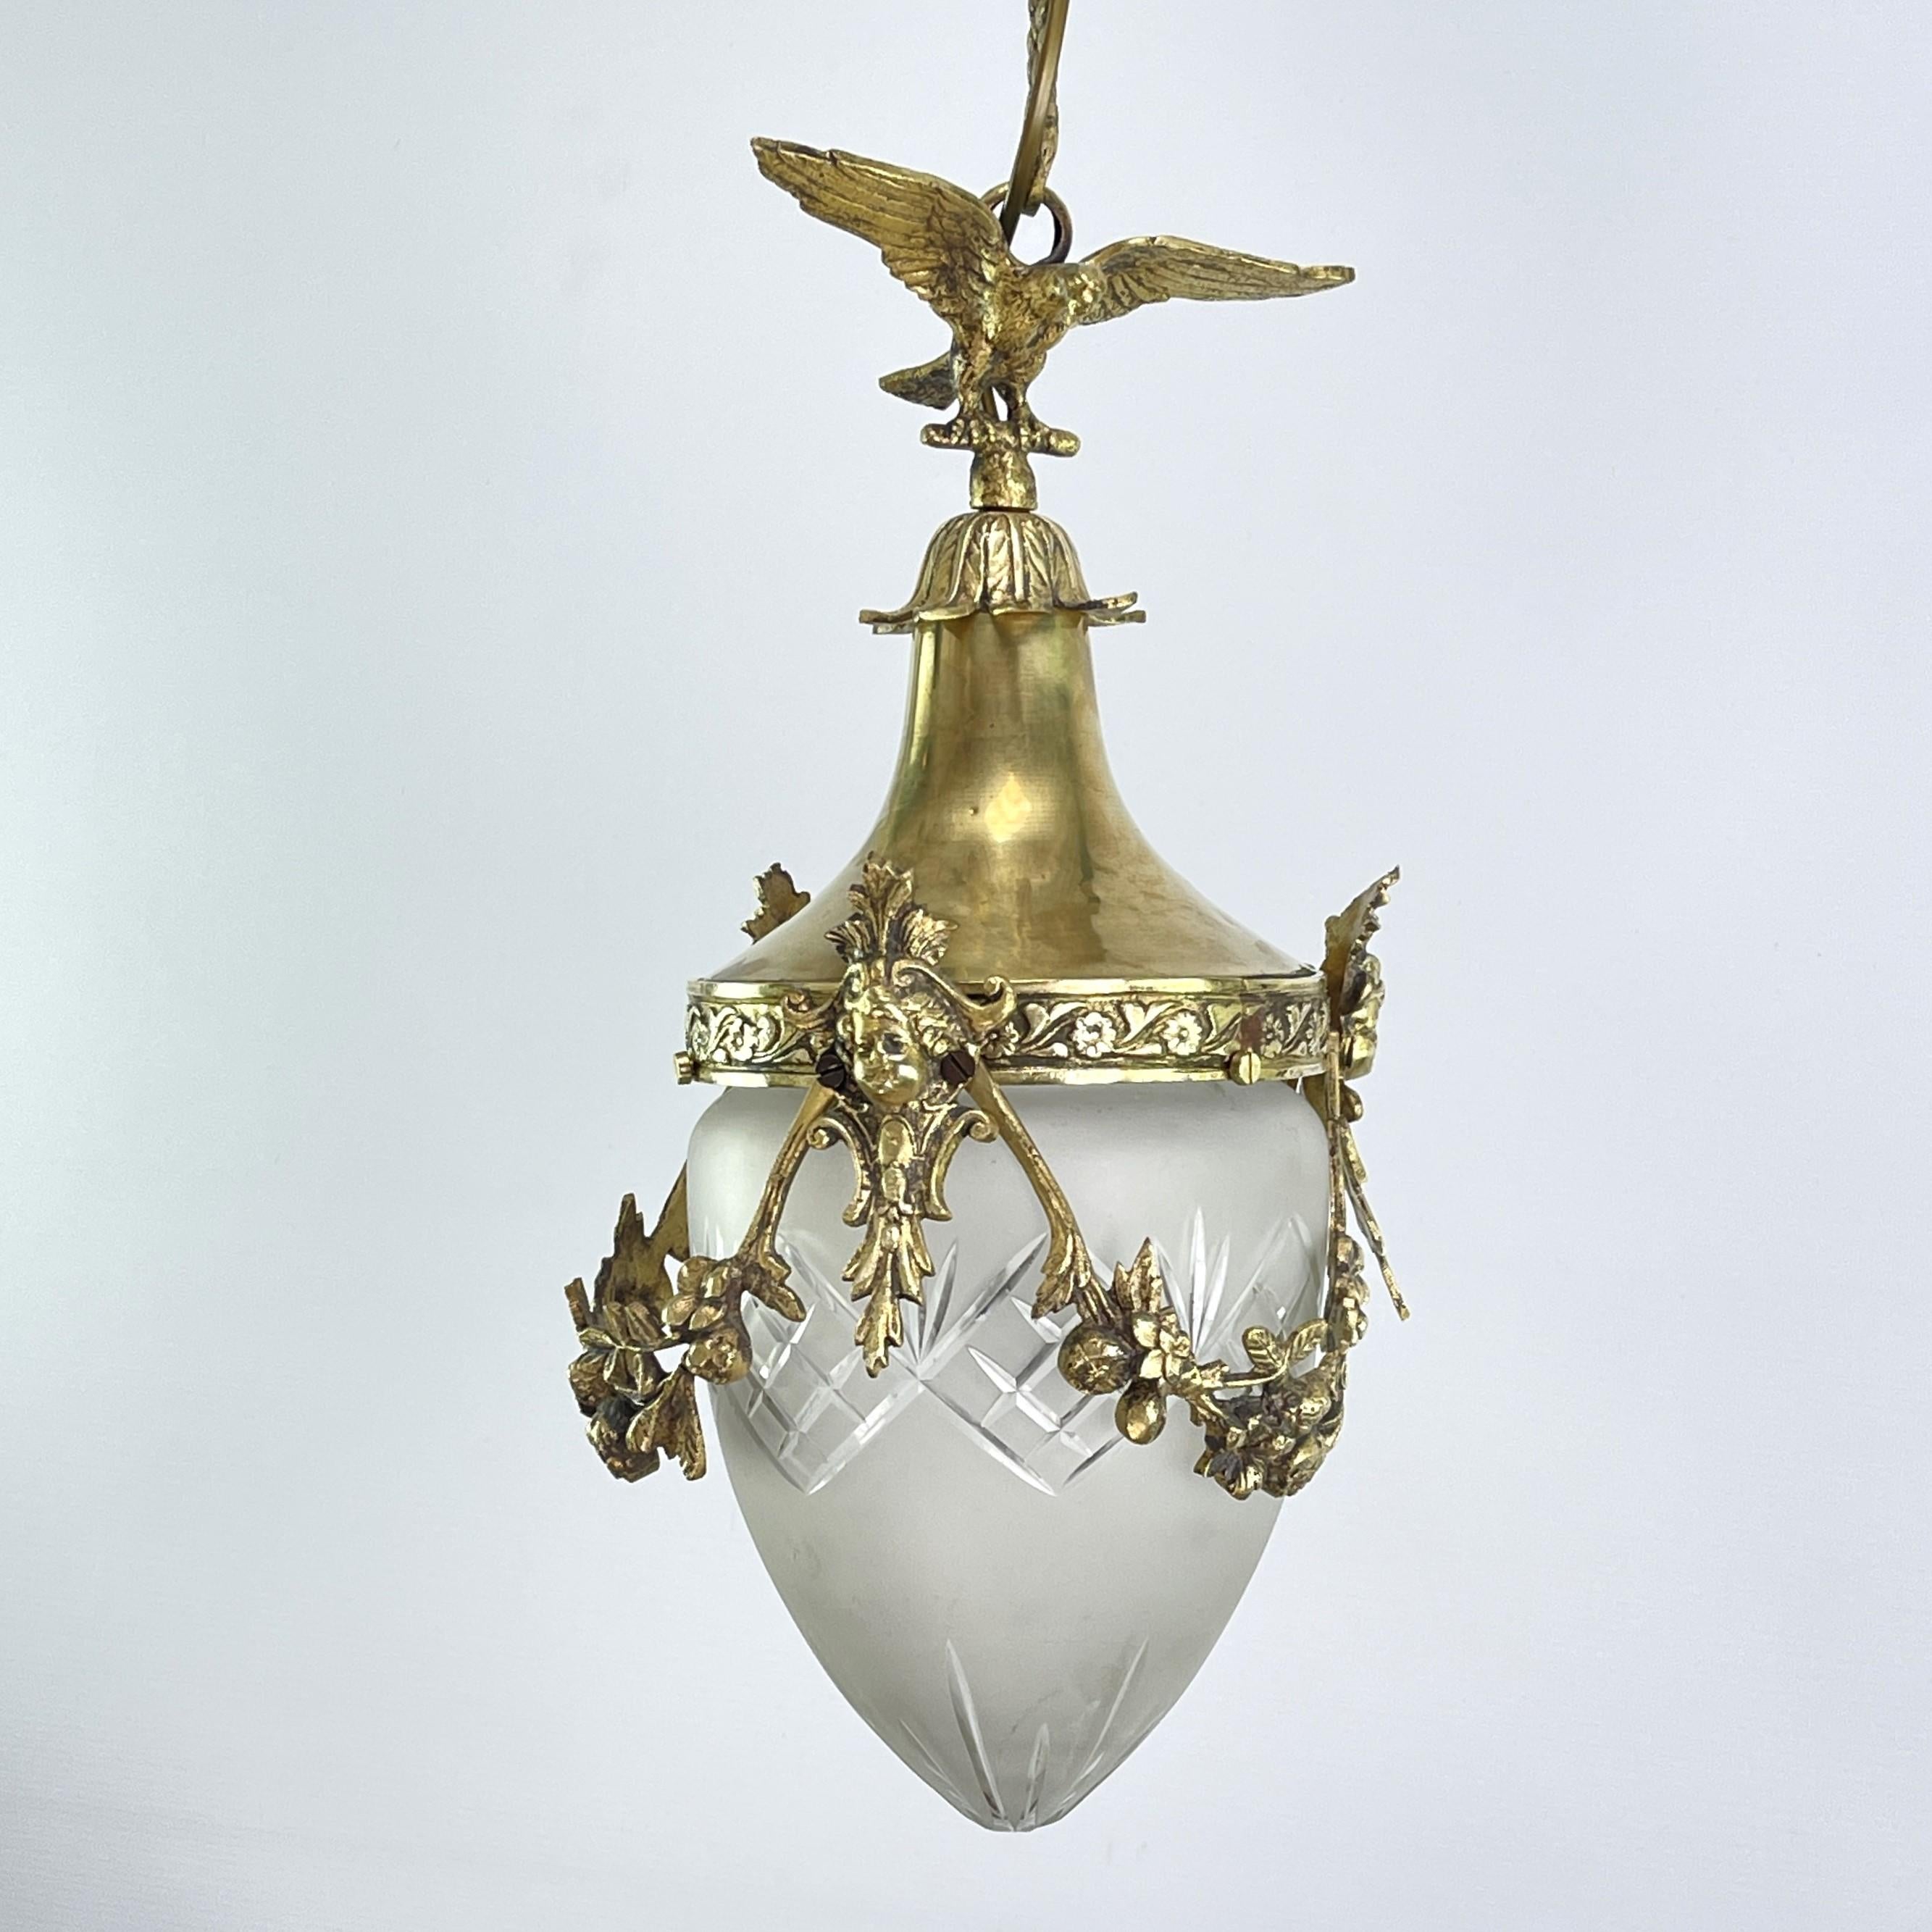 Art Nouveau bronze ceiling lamp with eagle

The Art Nouveau bronze ceiling lamp is an exquisite and artistic addition to any room.
The lamp is made of high-quality bronze and brass that has been carefully worked to create a smooth and shiny surface.